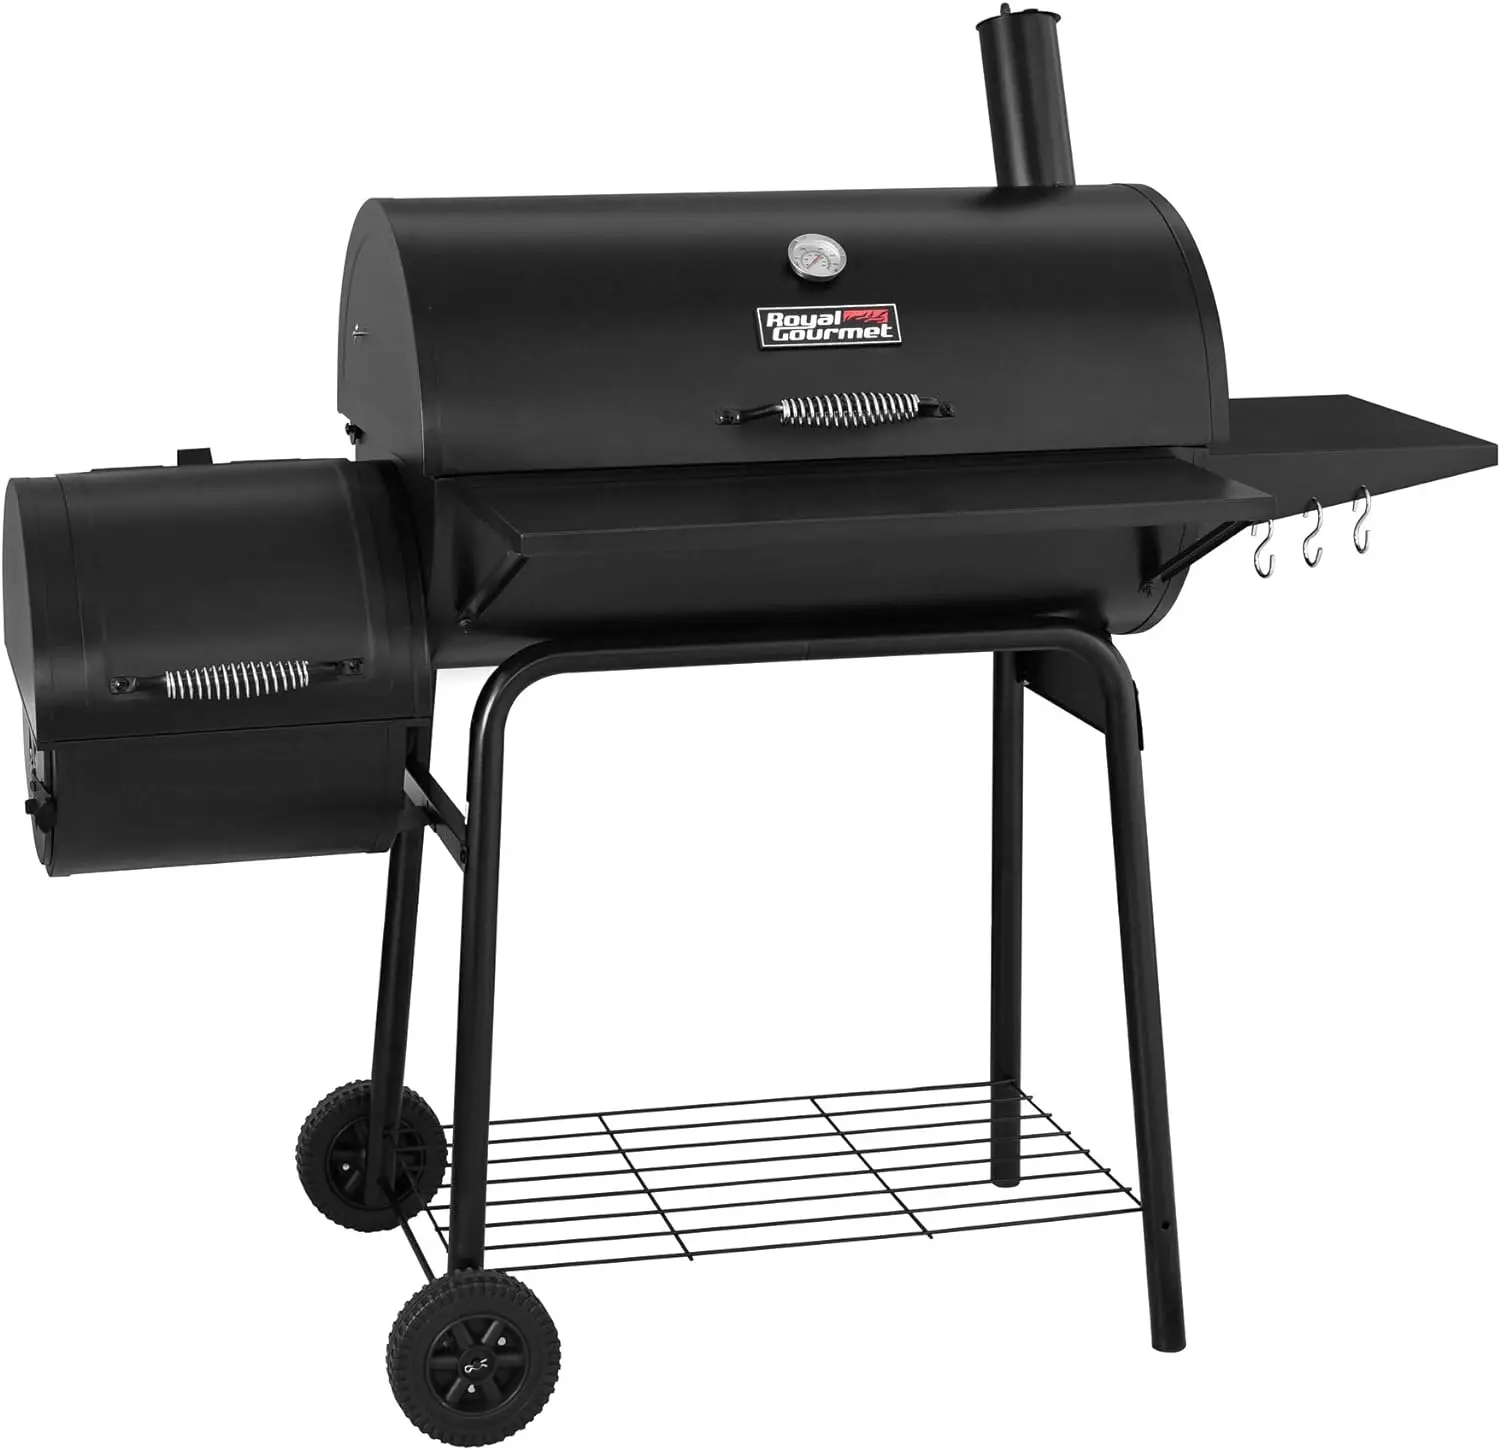 

Royal Gourmet CC1830S 30" BBQ Charcoal Grill and Offset Smoker | 811 Square Inch cooking surface, Outdoor for Camping